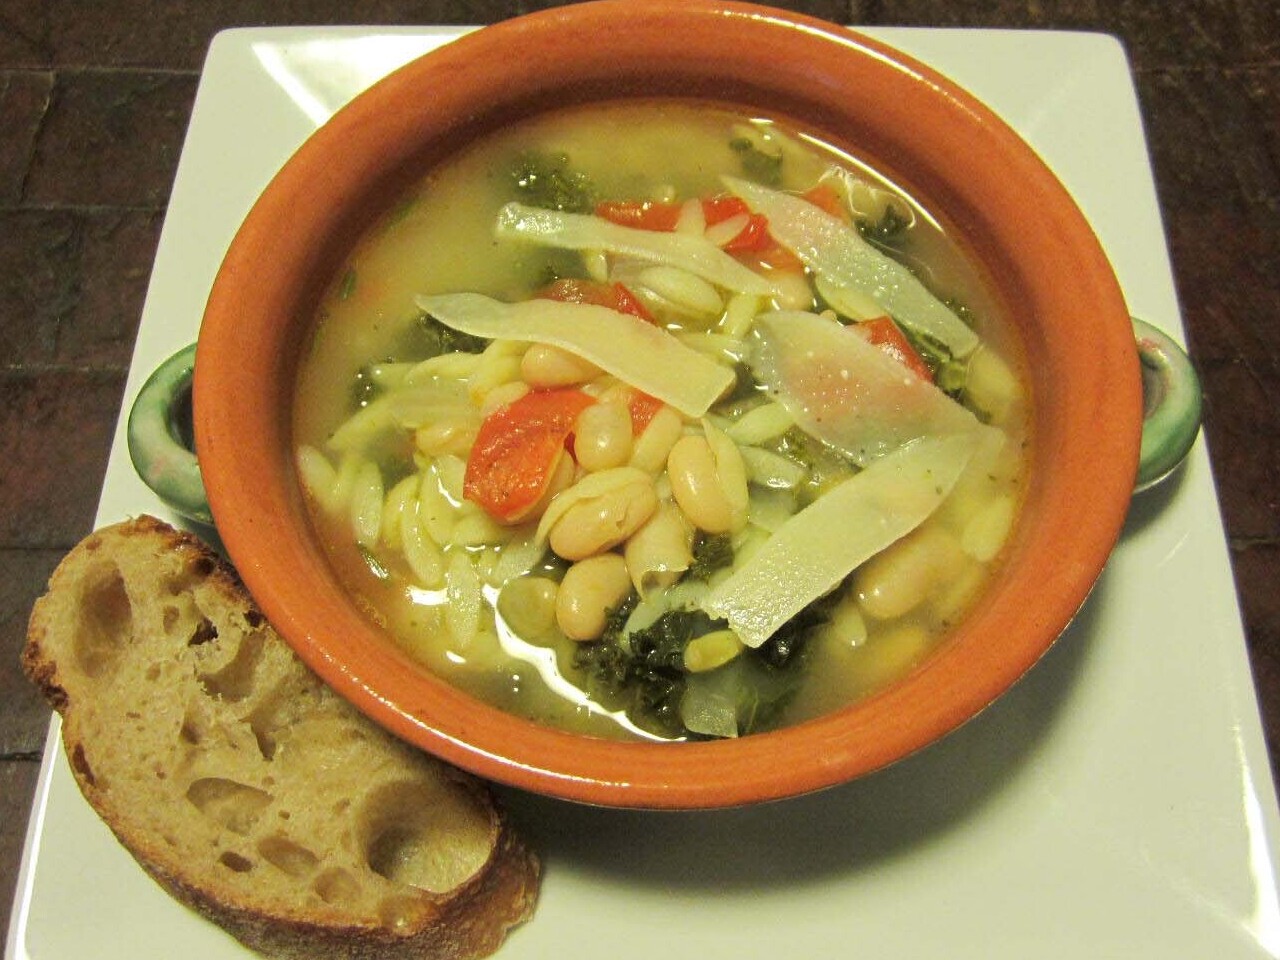 Bowl of kale, bean and orzo soup with a slice of bread on the side